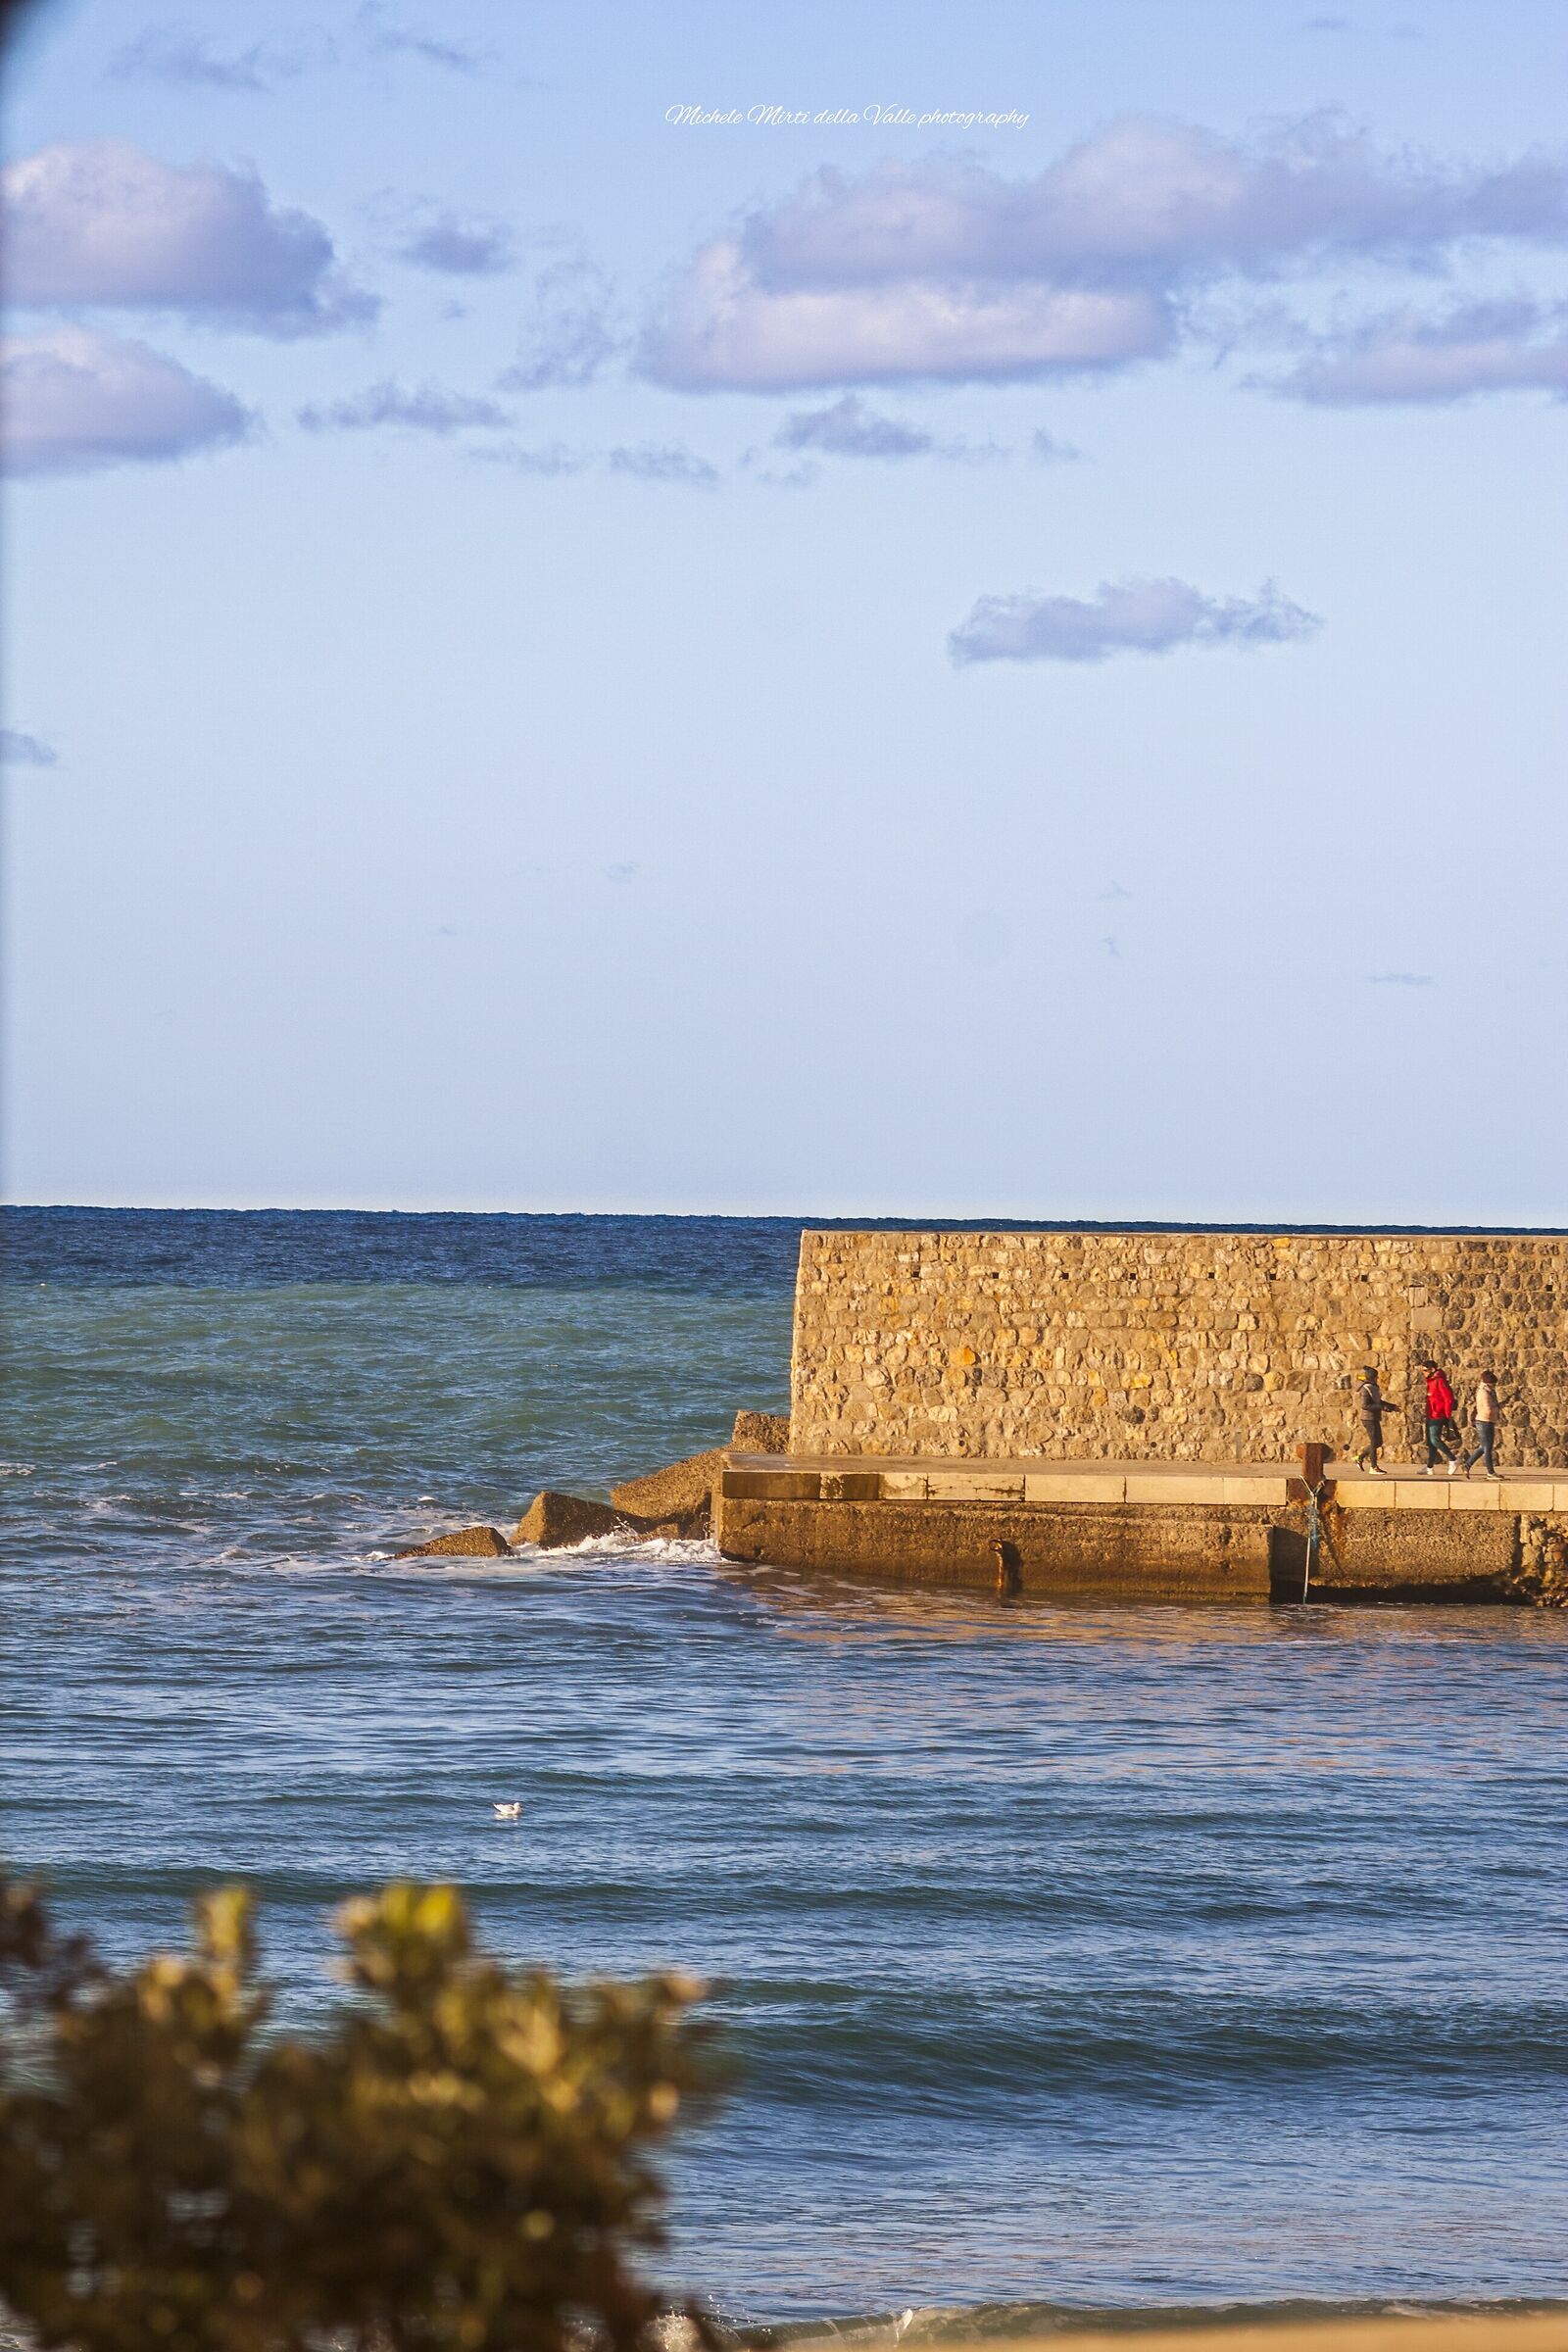 Walls of the Port of Cefalù...